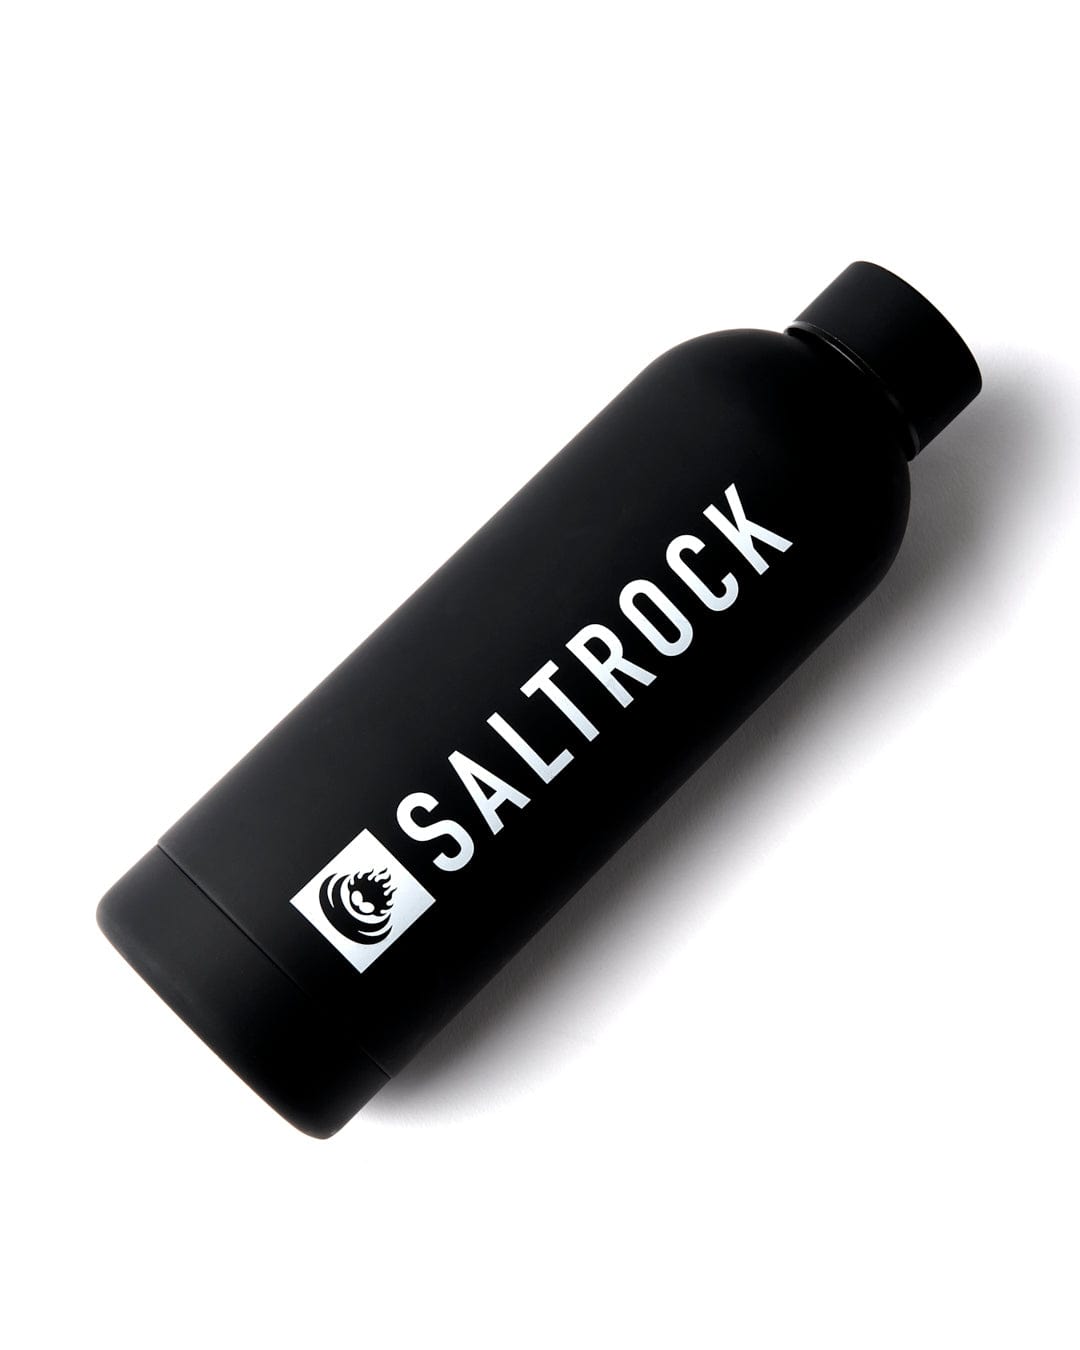 A black Core Stainless Steel Water Bottle with the Saltrock branding on it.